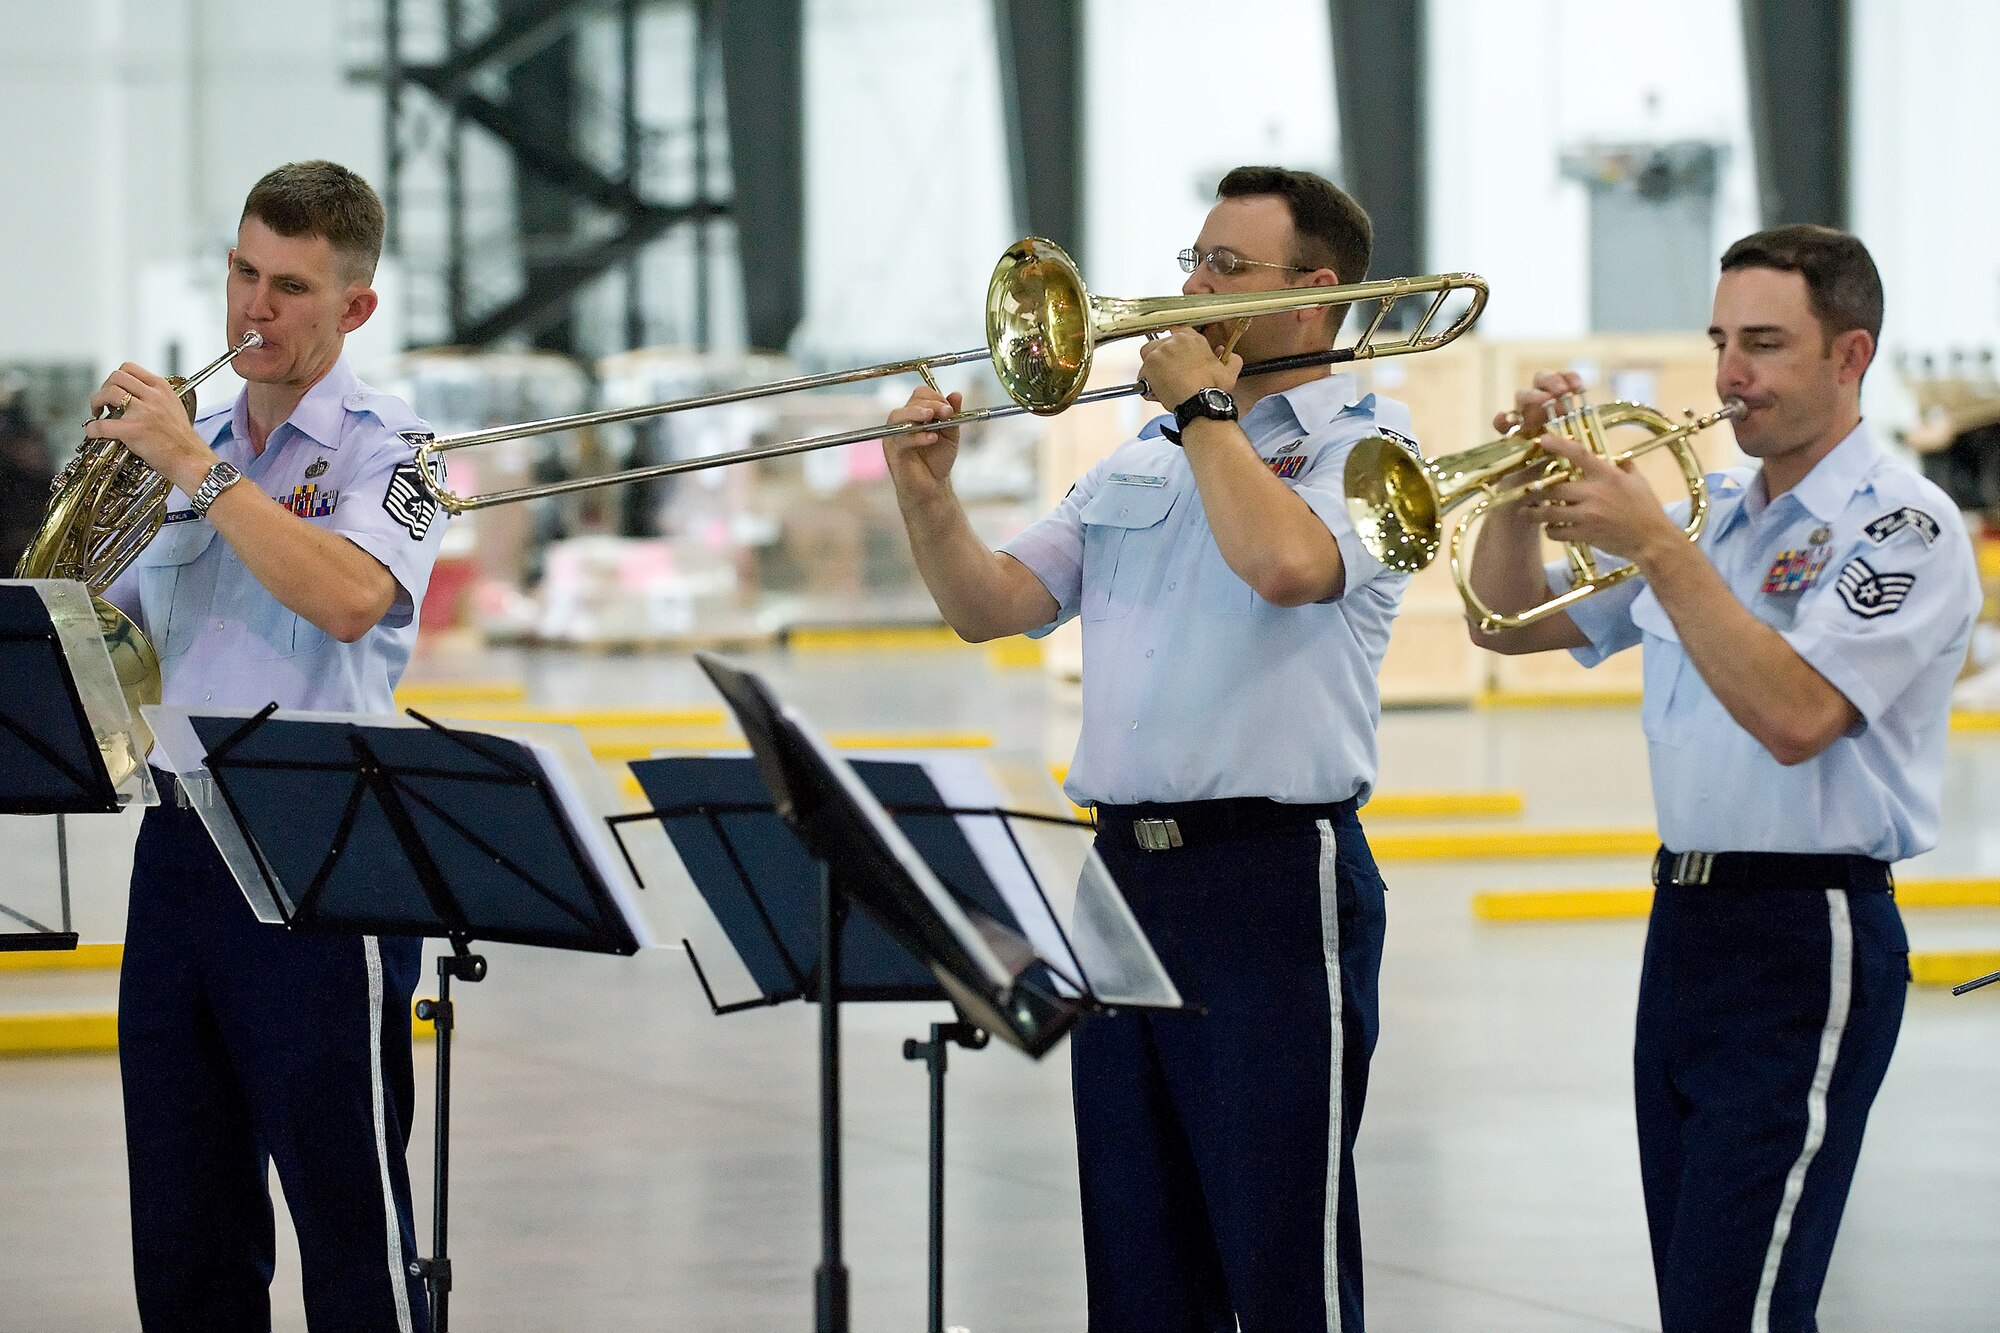 (From left) Master Sgt. Bob Newlin, Staff Sgt. John Garcia and Staff Sgt. Jonathan Rattay, members of the Heritage of America Band traveling ensemble Vector, perform in the Super Port at Dover Air Force Base, Del., June 15. Vector performed at several locations at Dover AFB and the local community as part of a community relations tour that included shows in various venues in Philadelphia. (U.S. Air Force photo/Roland Balik)